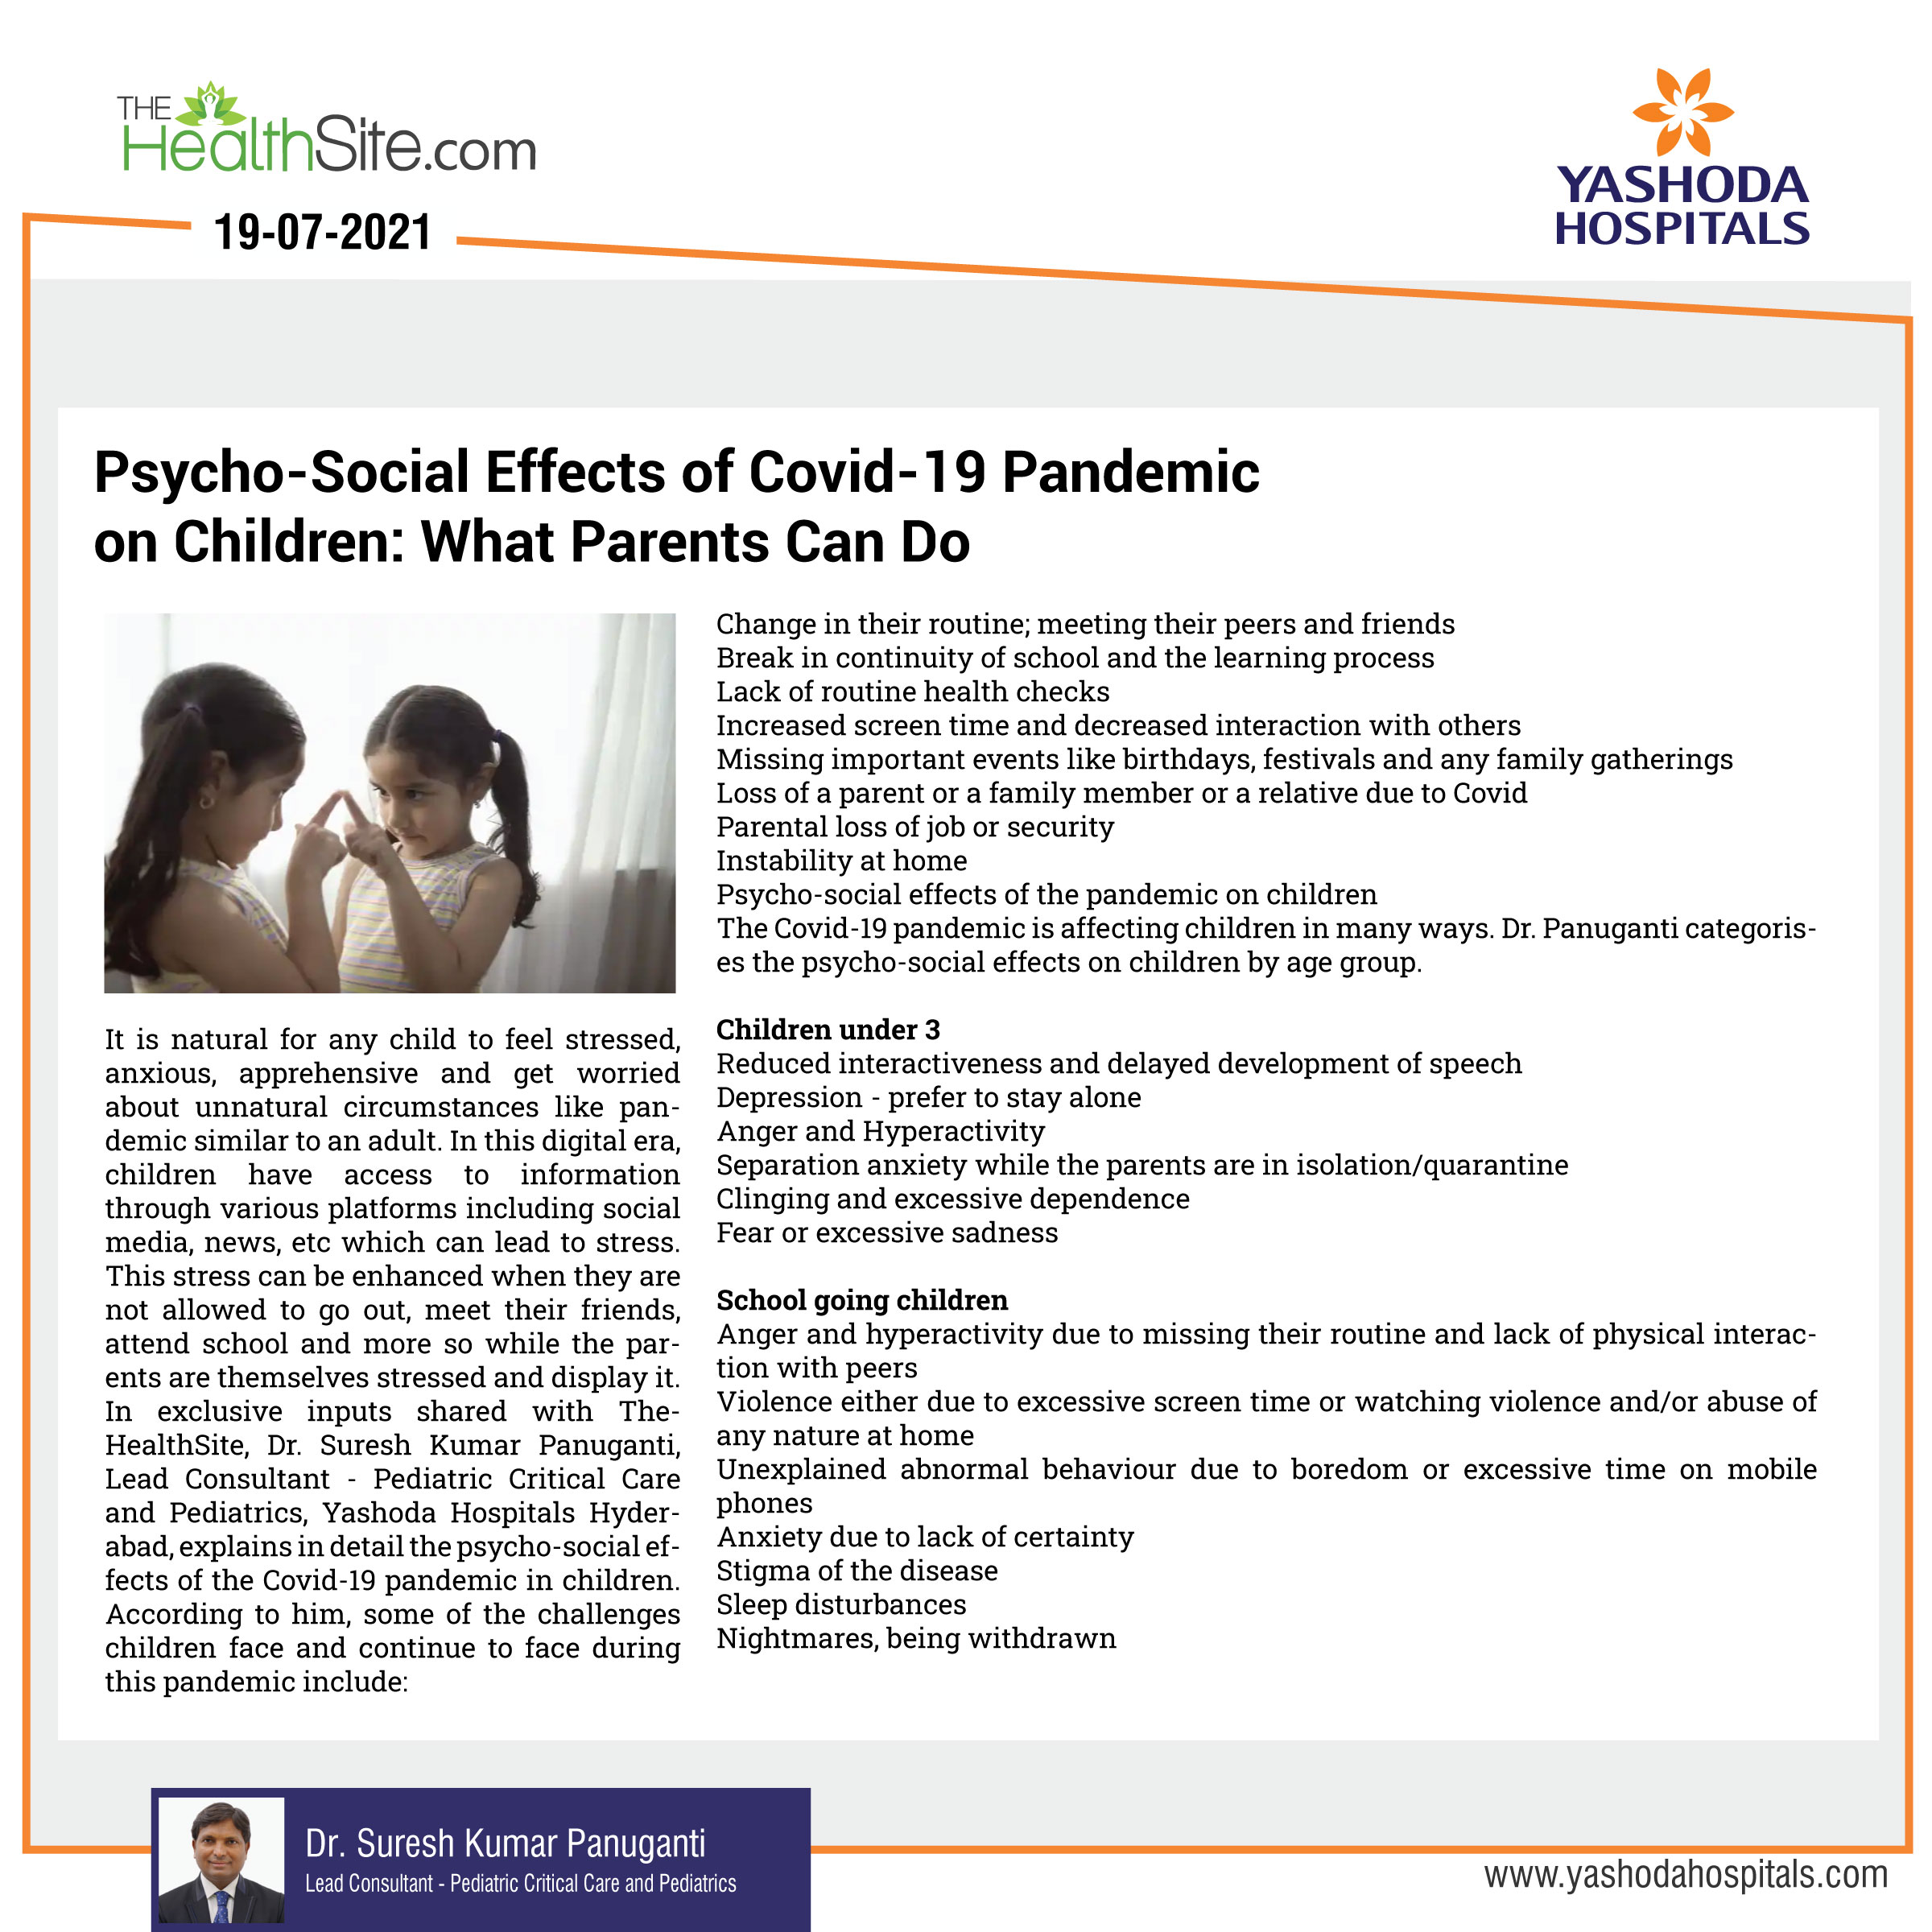 What parents can do regarding psycho social effect in children during pandemic